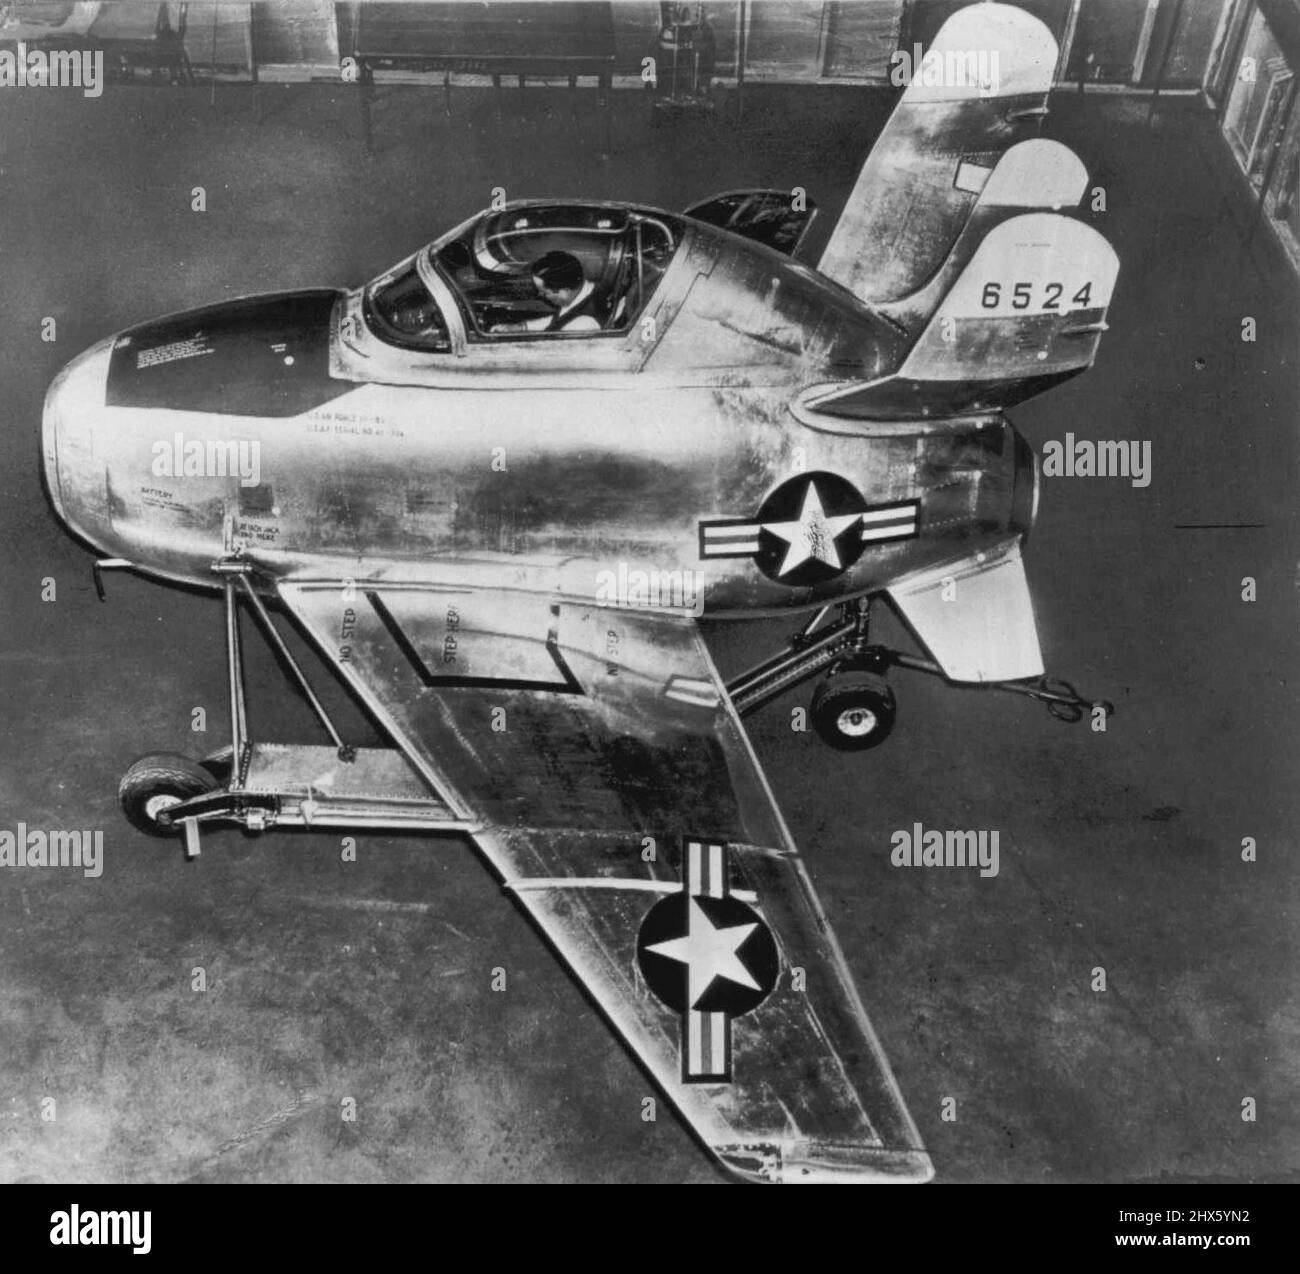 'Parasite' Fighter Plane -- Mounted on a special dolly, the U.S. Air Force's new 'parasite' jet-powered fighter plane, the XF-85 (above) is ready for ground and wind tunnel tests. Plane has no landing gear and is designed to fit into the bomb bay of a B-36 from which all landings and takeoffs are made by means of a hooking mechanism. Craft has a wing span of 21 feet and is 15 feet long. Wings are folded back within the bomb bay. Odd tail assembly gives maximum flight stability and still permits Stock Photo